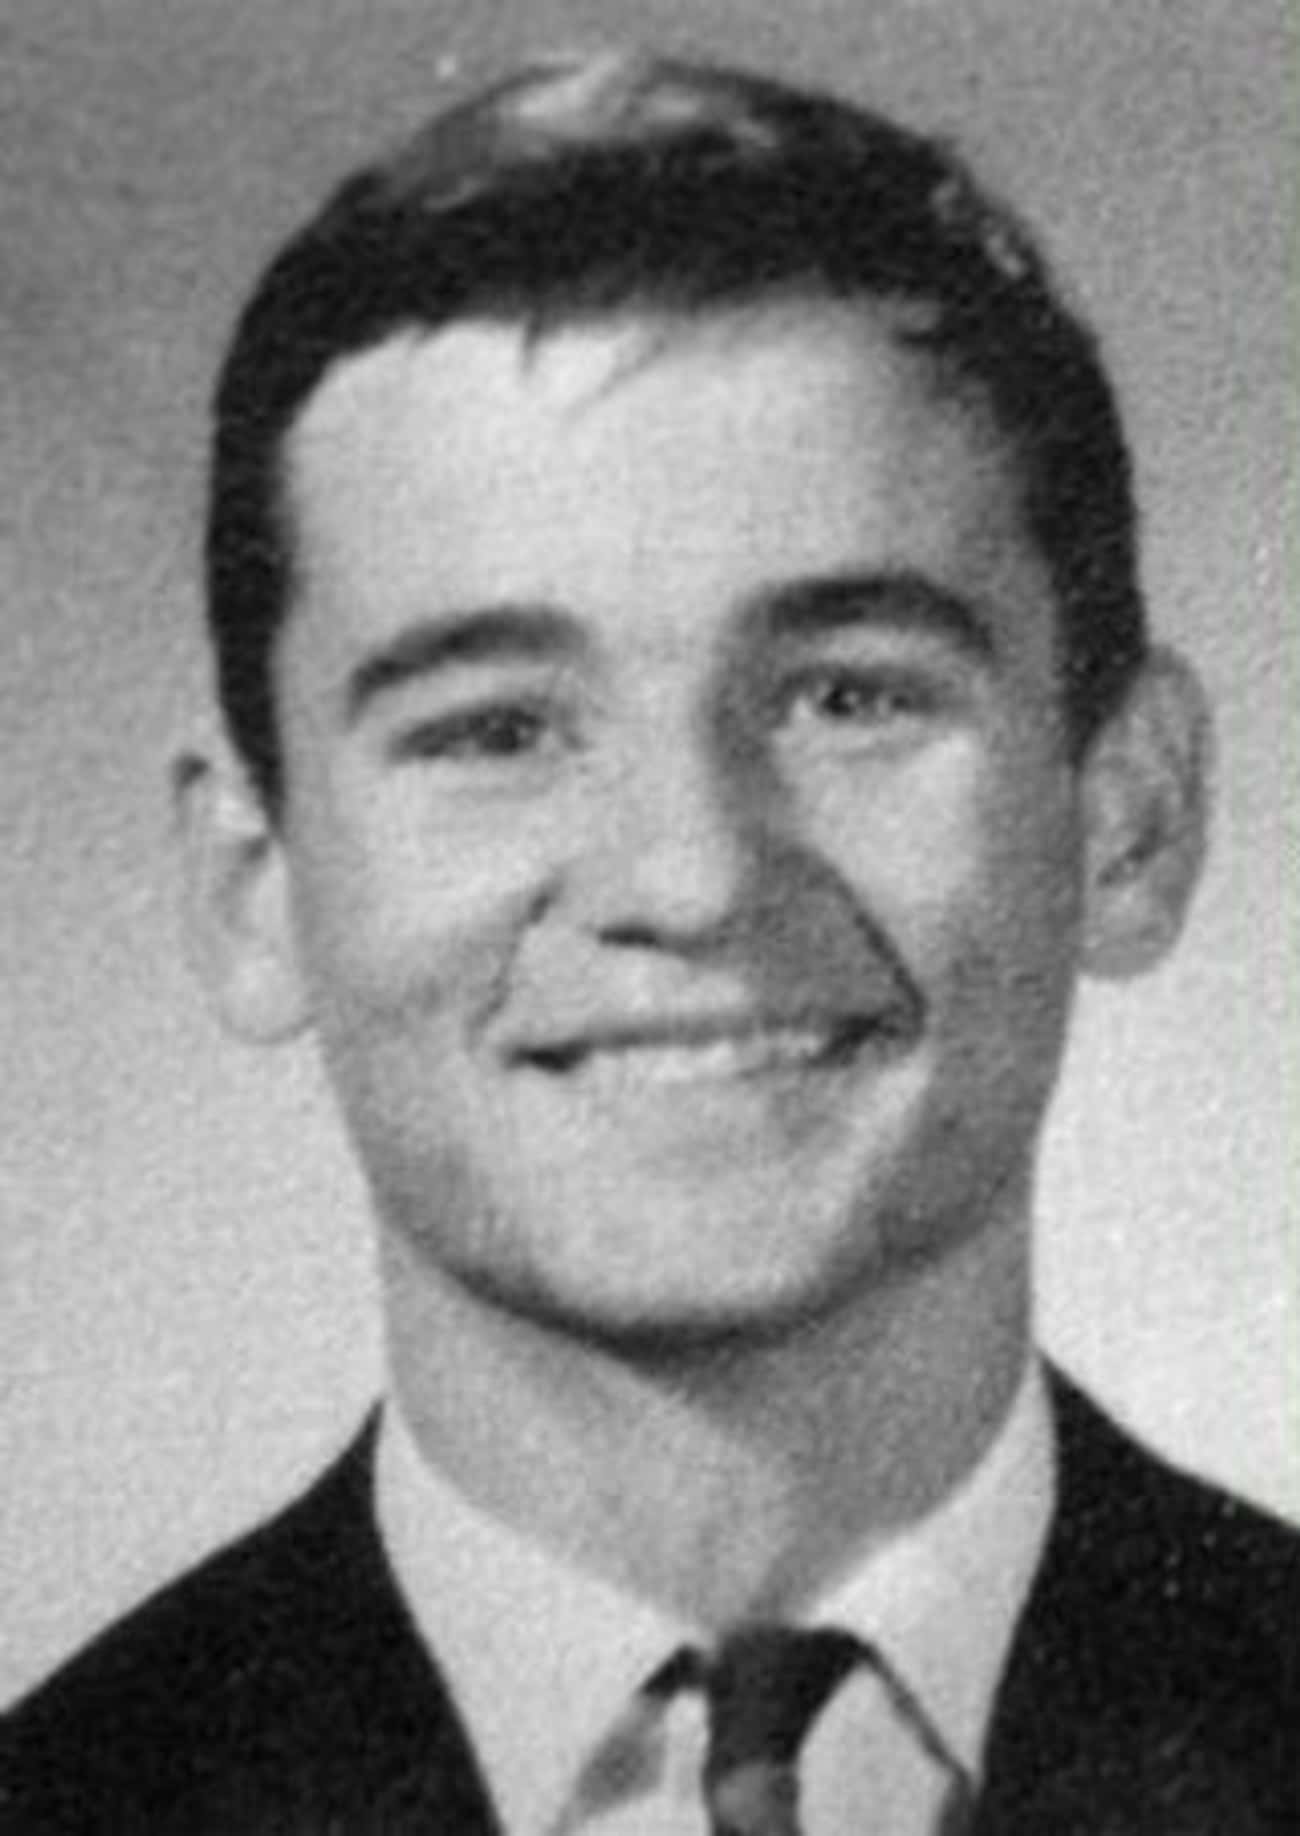 young-bill-murray-in-suit-and-tie-photo-